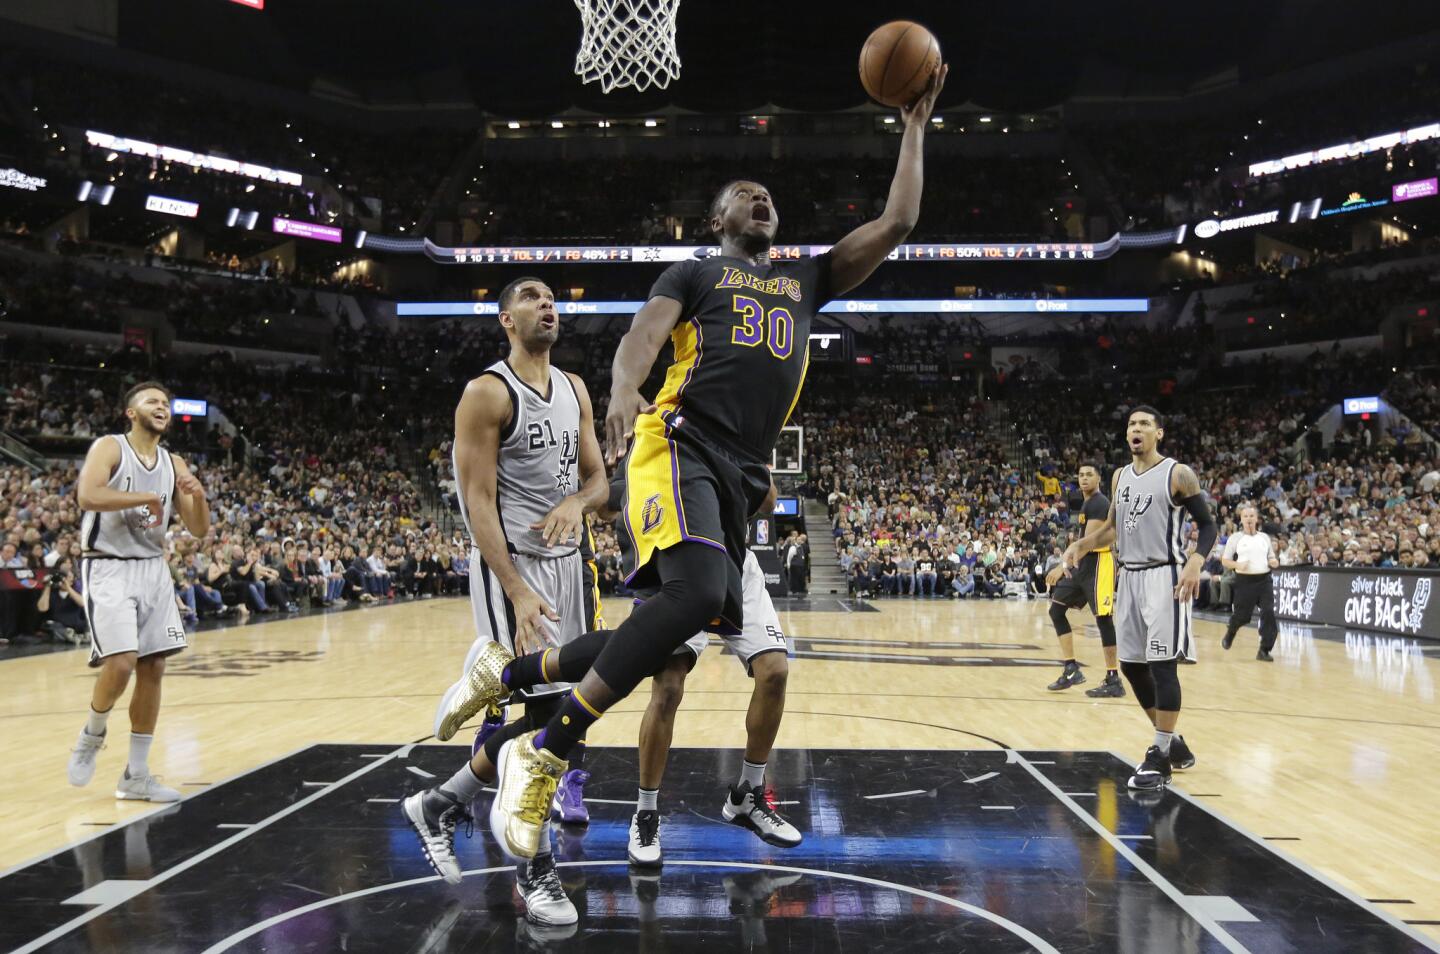 Los Angeles Lakers forward Julius Randle (30) shoots past San Antonio Spurs center Tim Duncan (21) during the first half on Friday.